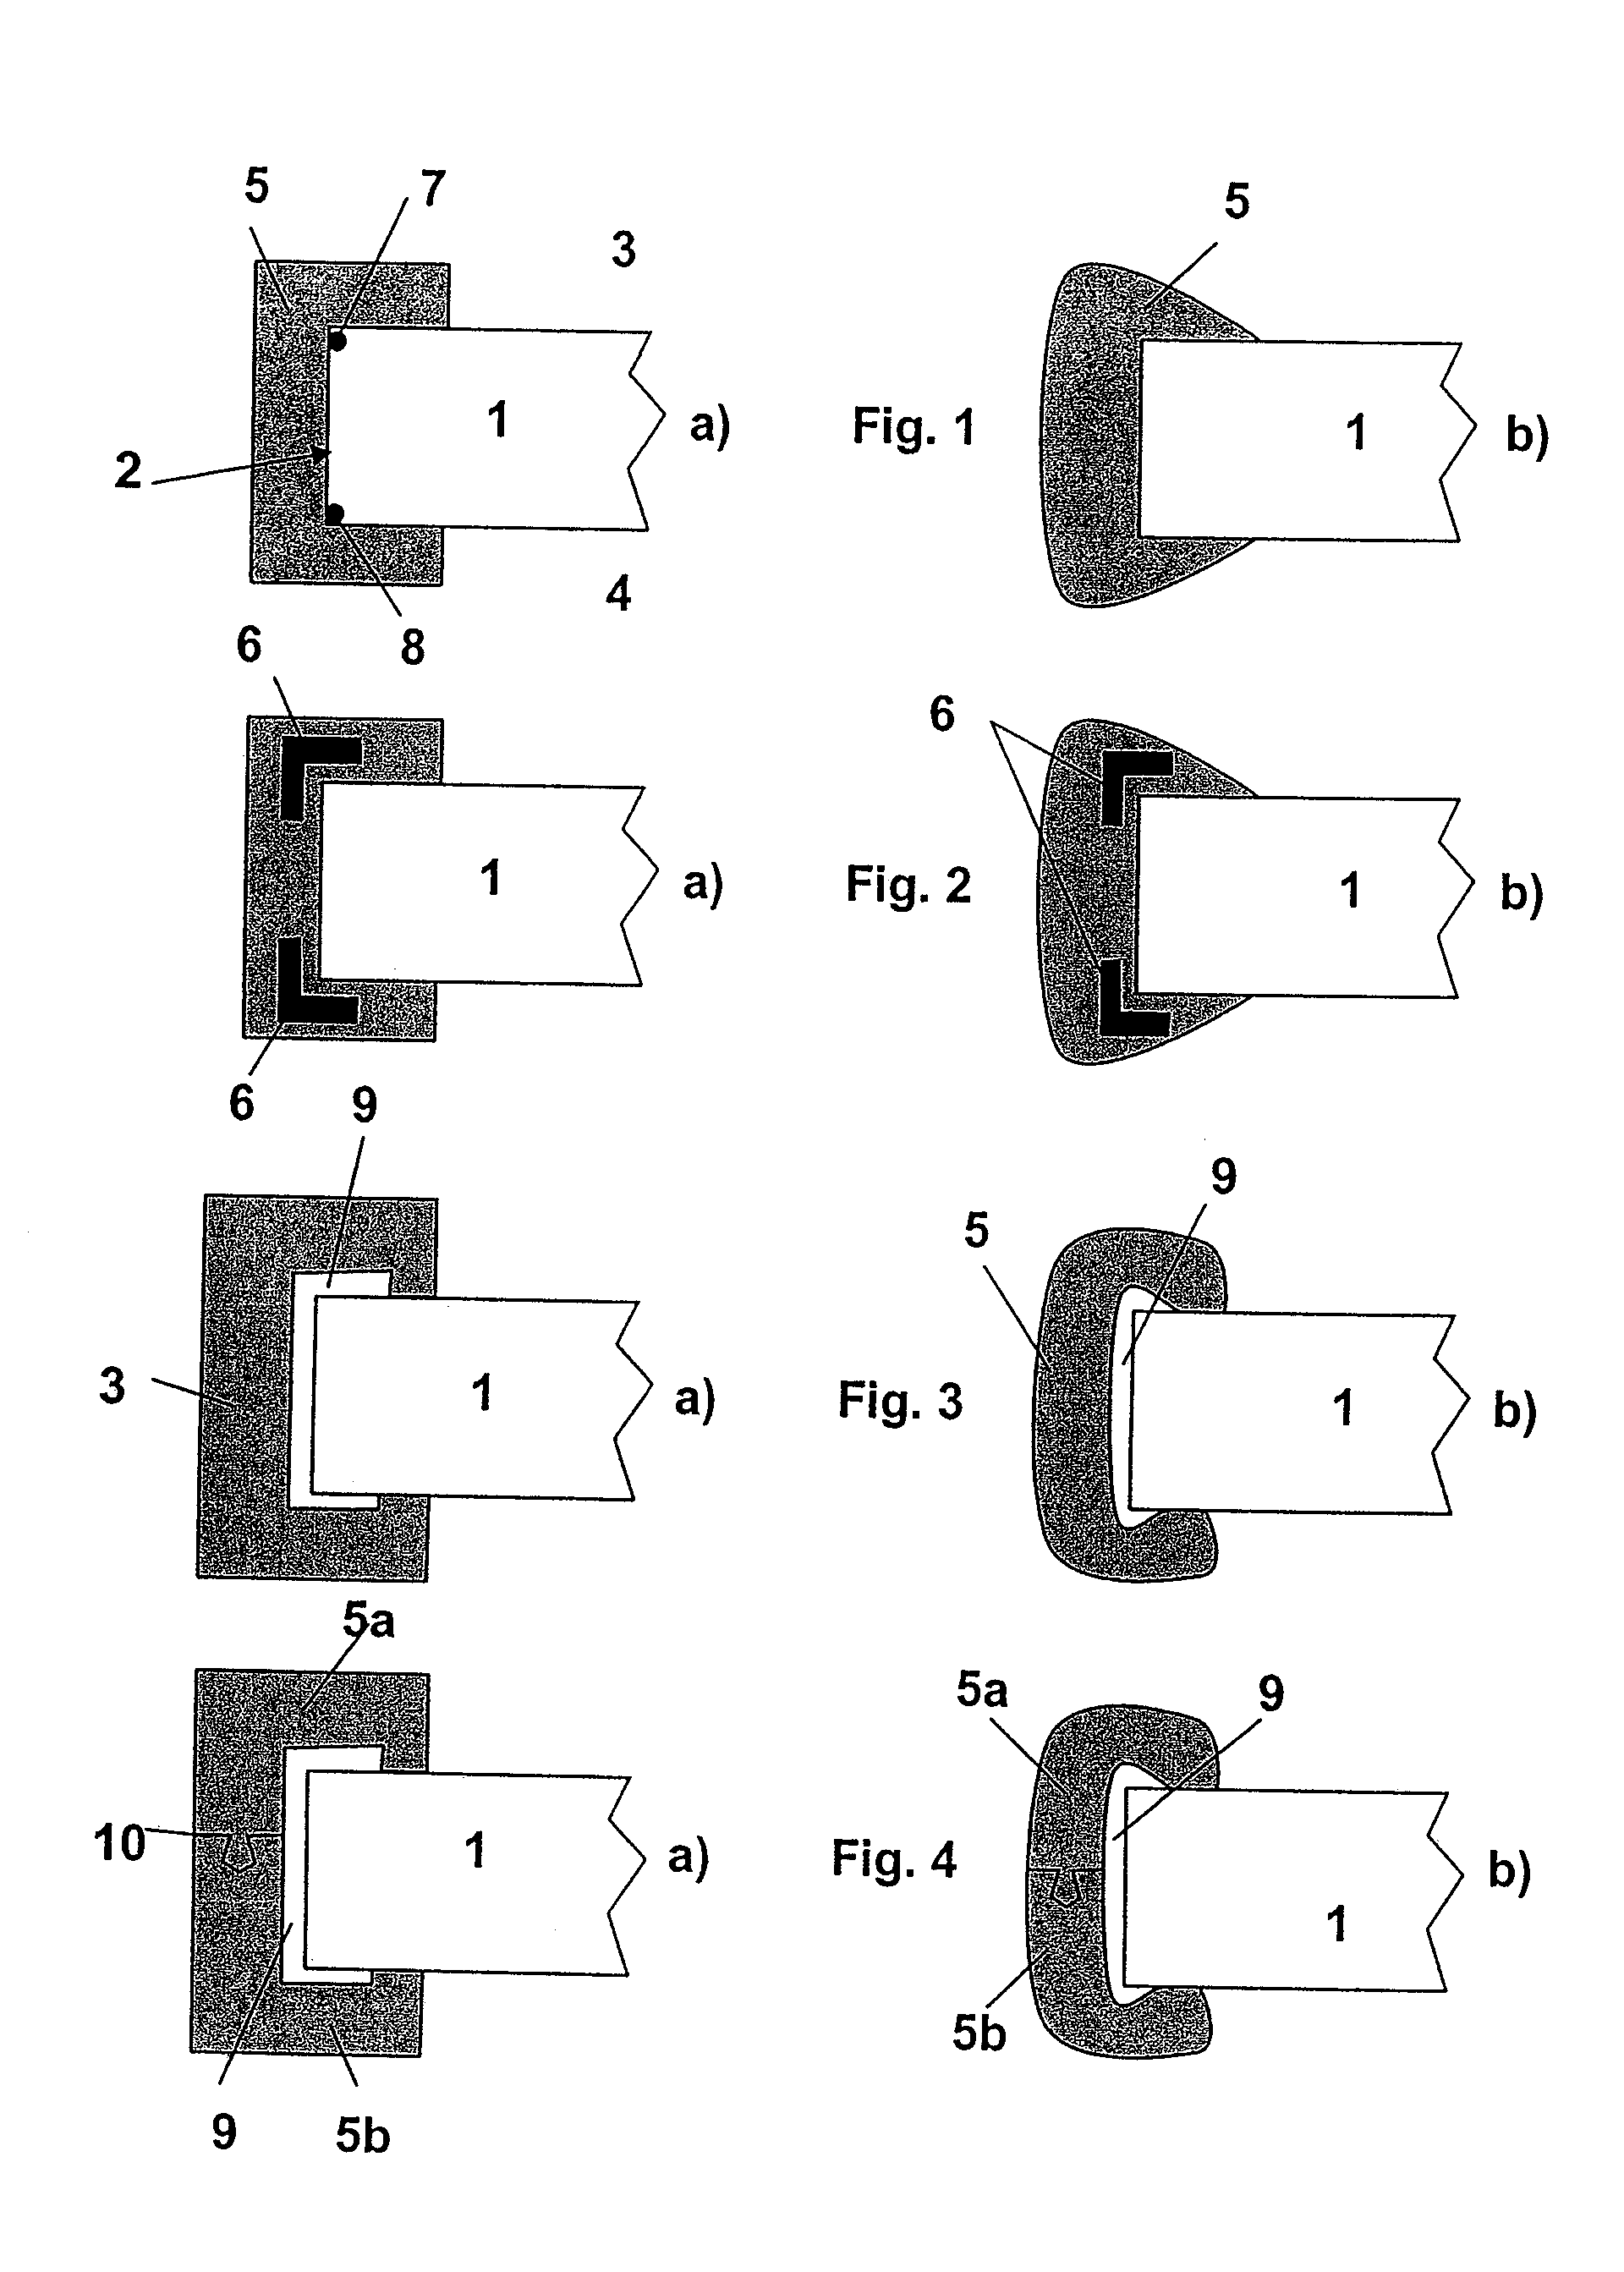 Method for Producing a Glass Pane